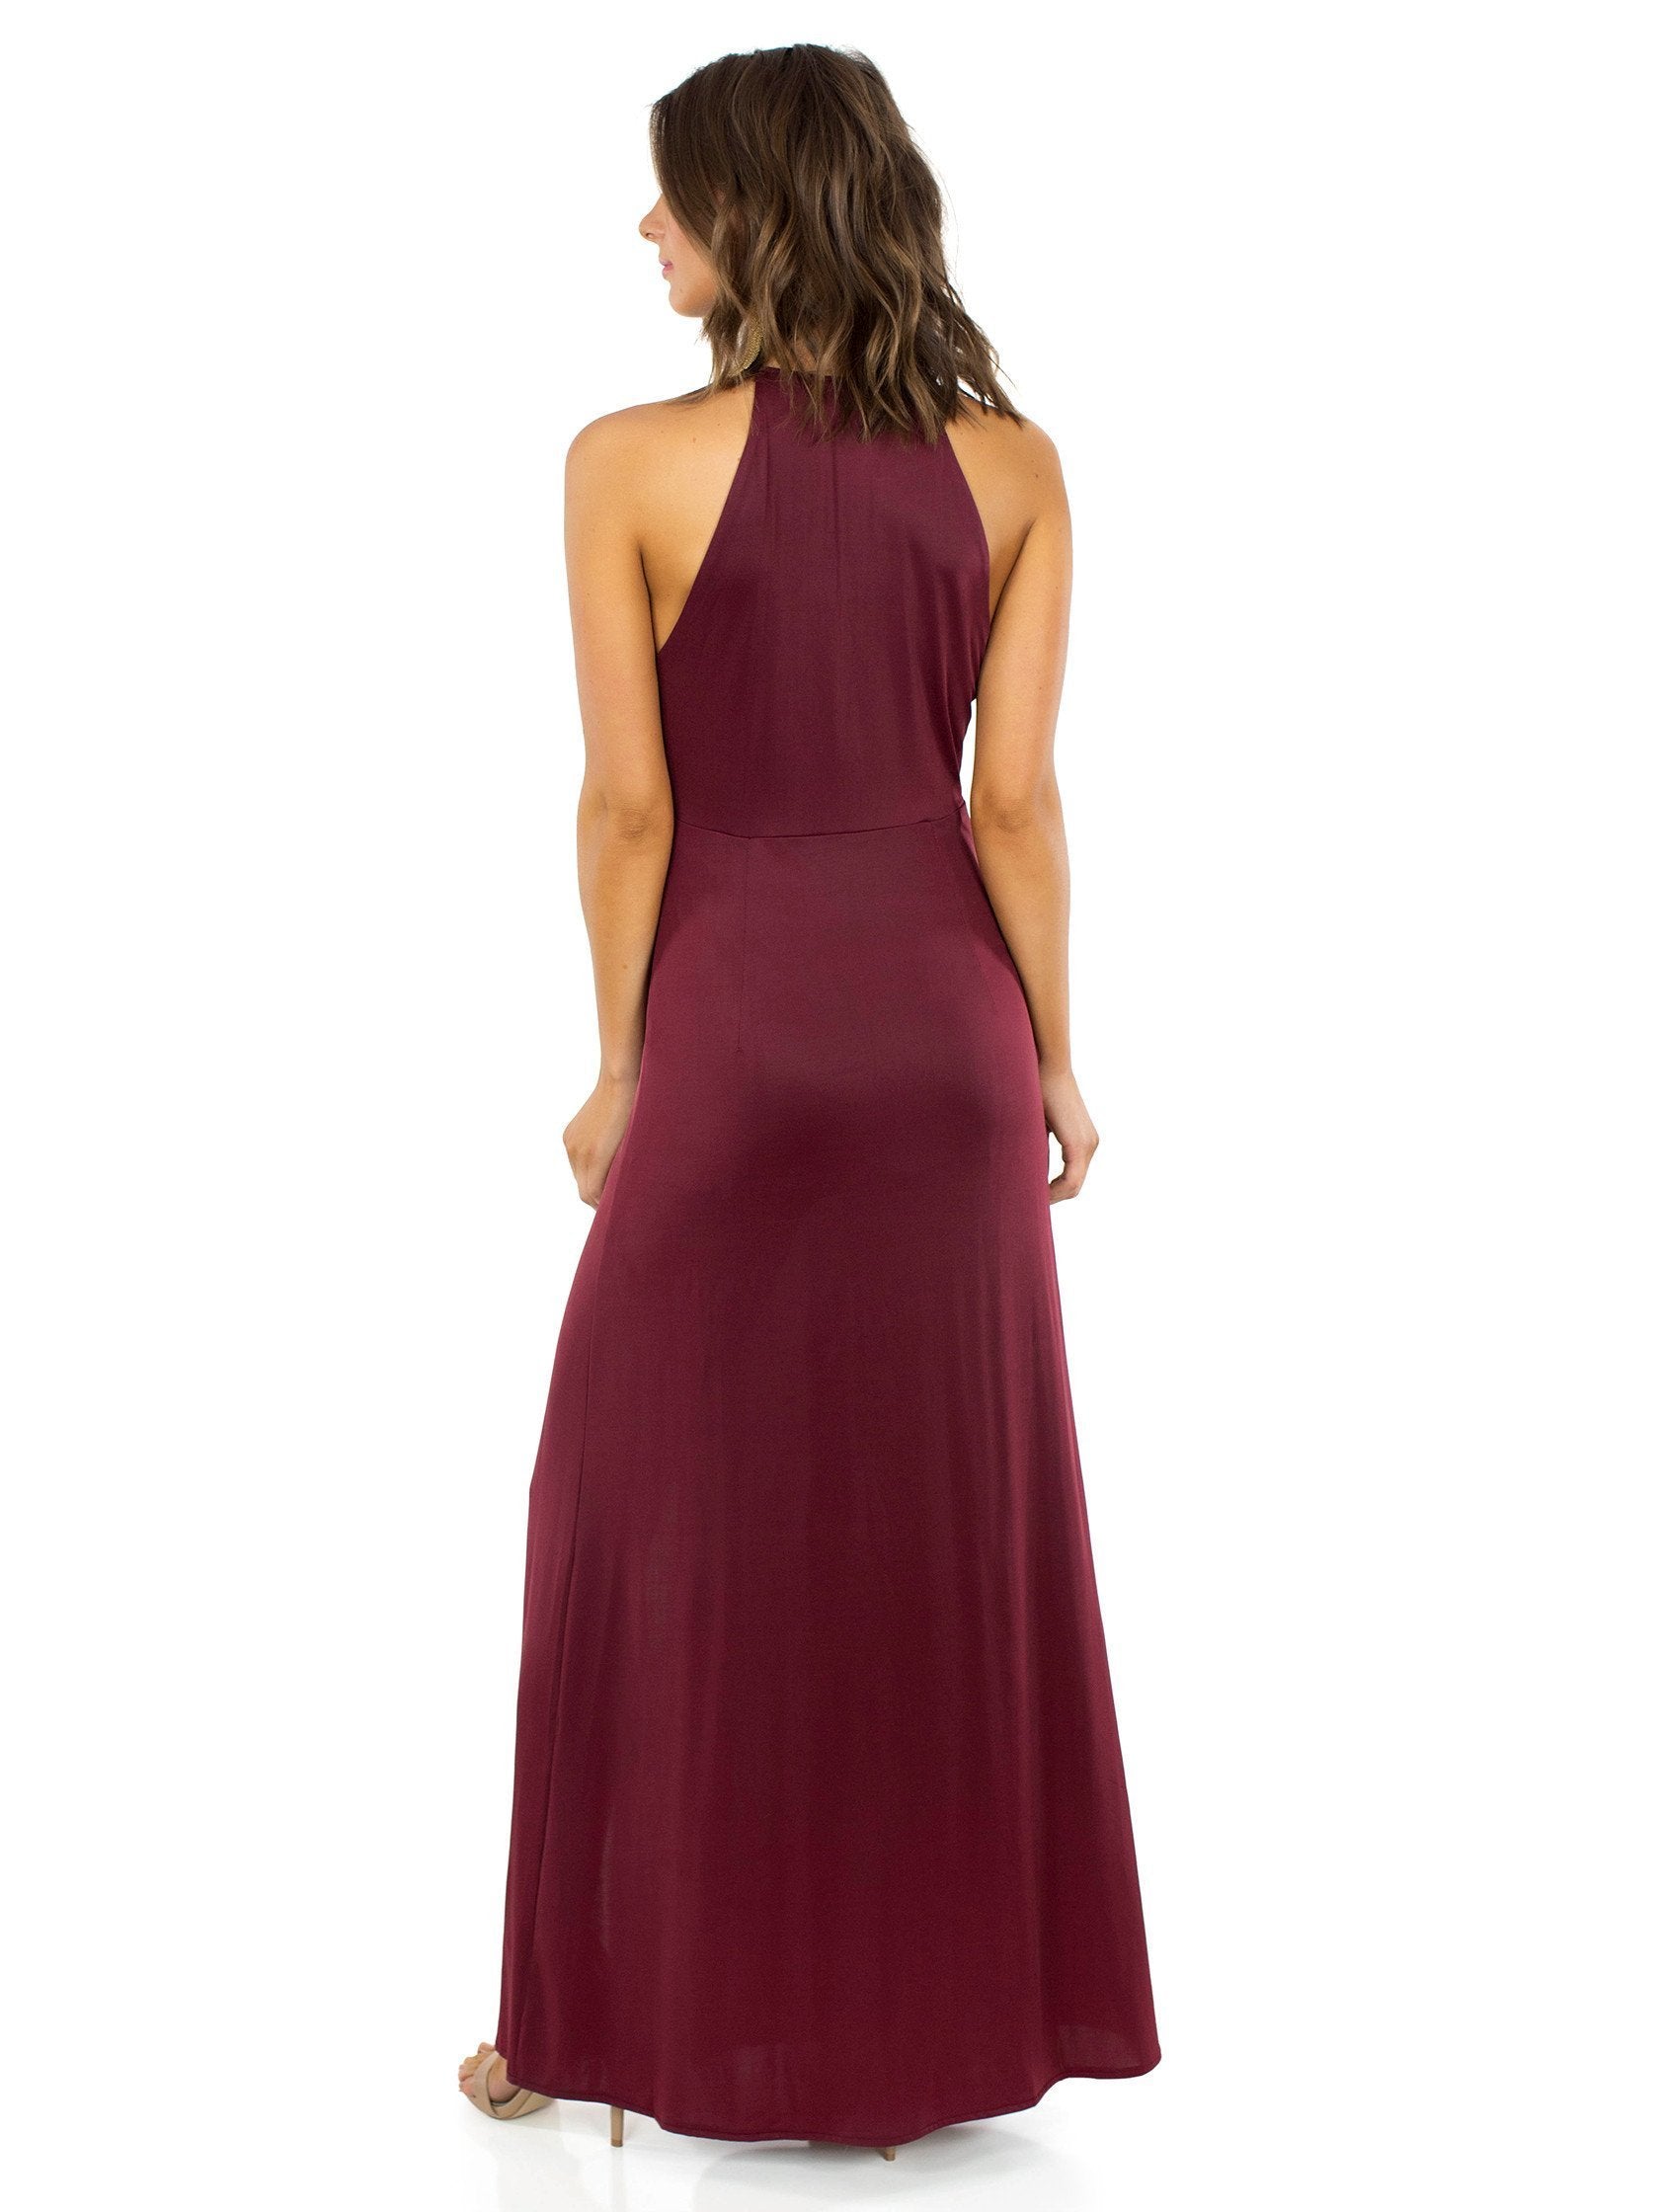 Women wearing a dress rental from WYLDR called Out Of My League Maxi Dress